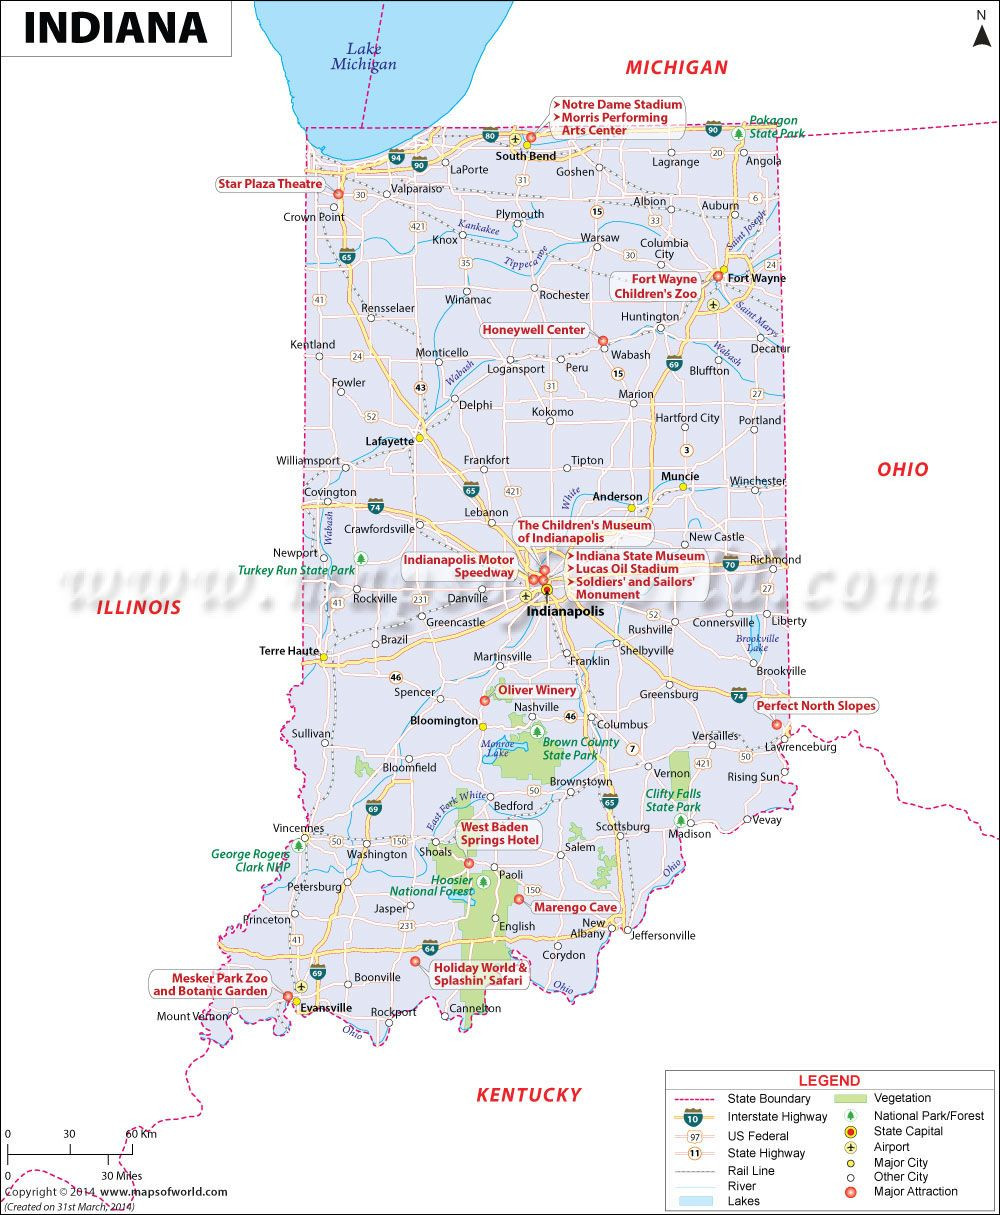 Indiana map showing the major travel attractions including cities